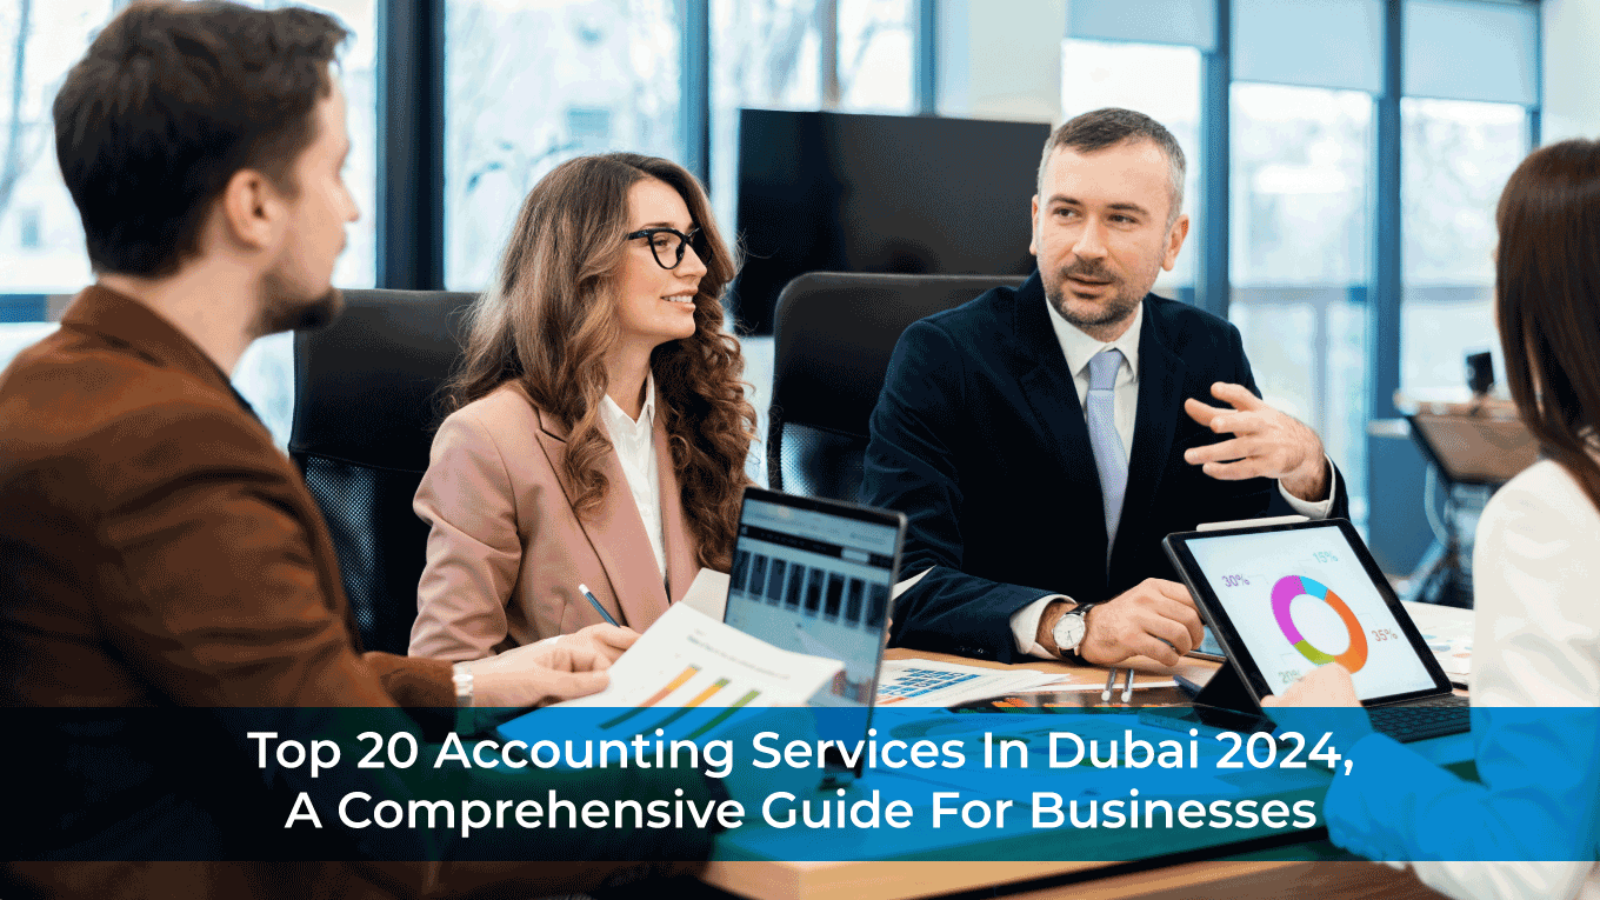 Top 20 Accounting Services in Dubai 2024: A Comprehensive Guide for Businesses